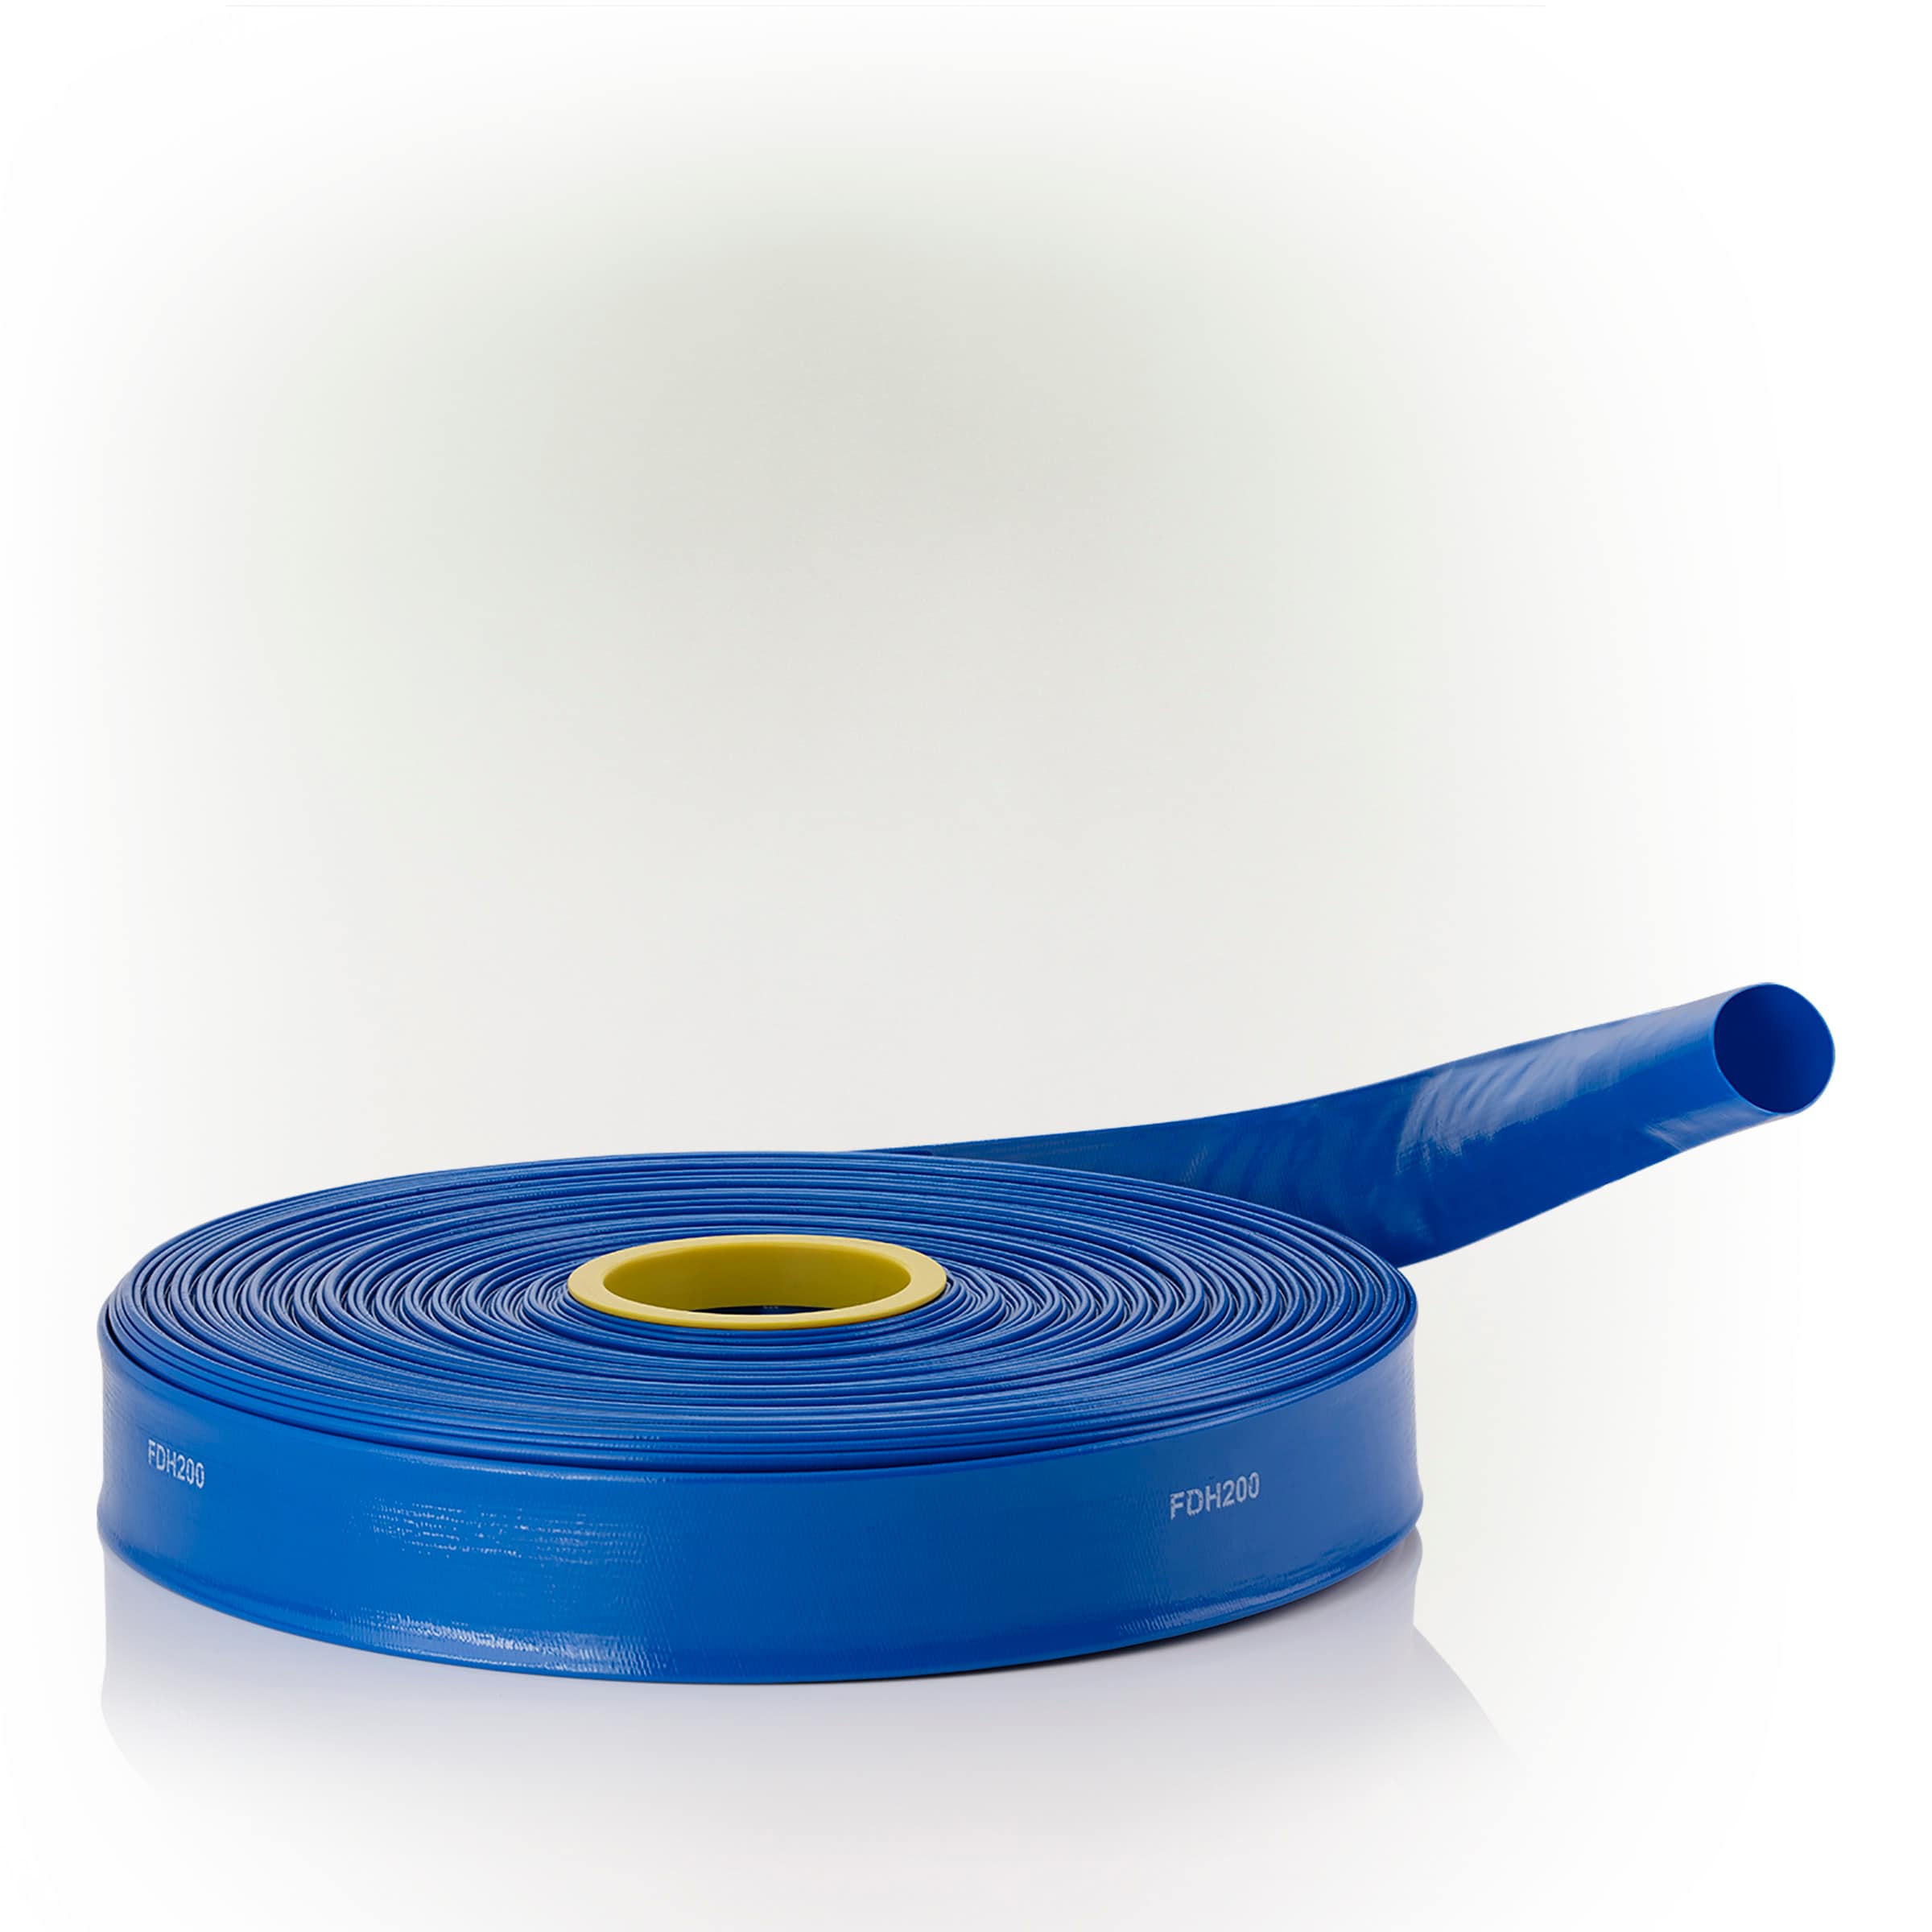 Alpine Corporation Blue Pond Tubing in the Pond Accessories department at